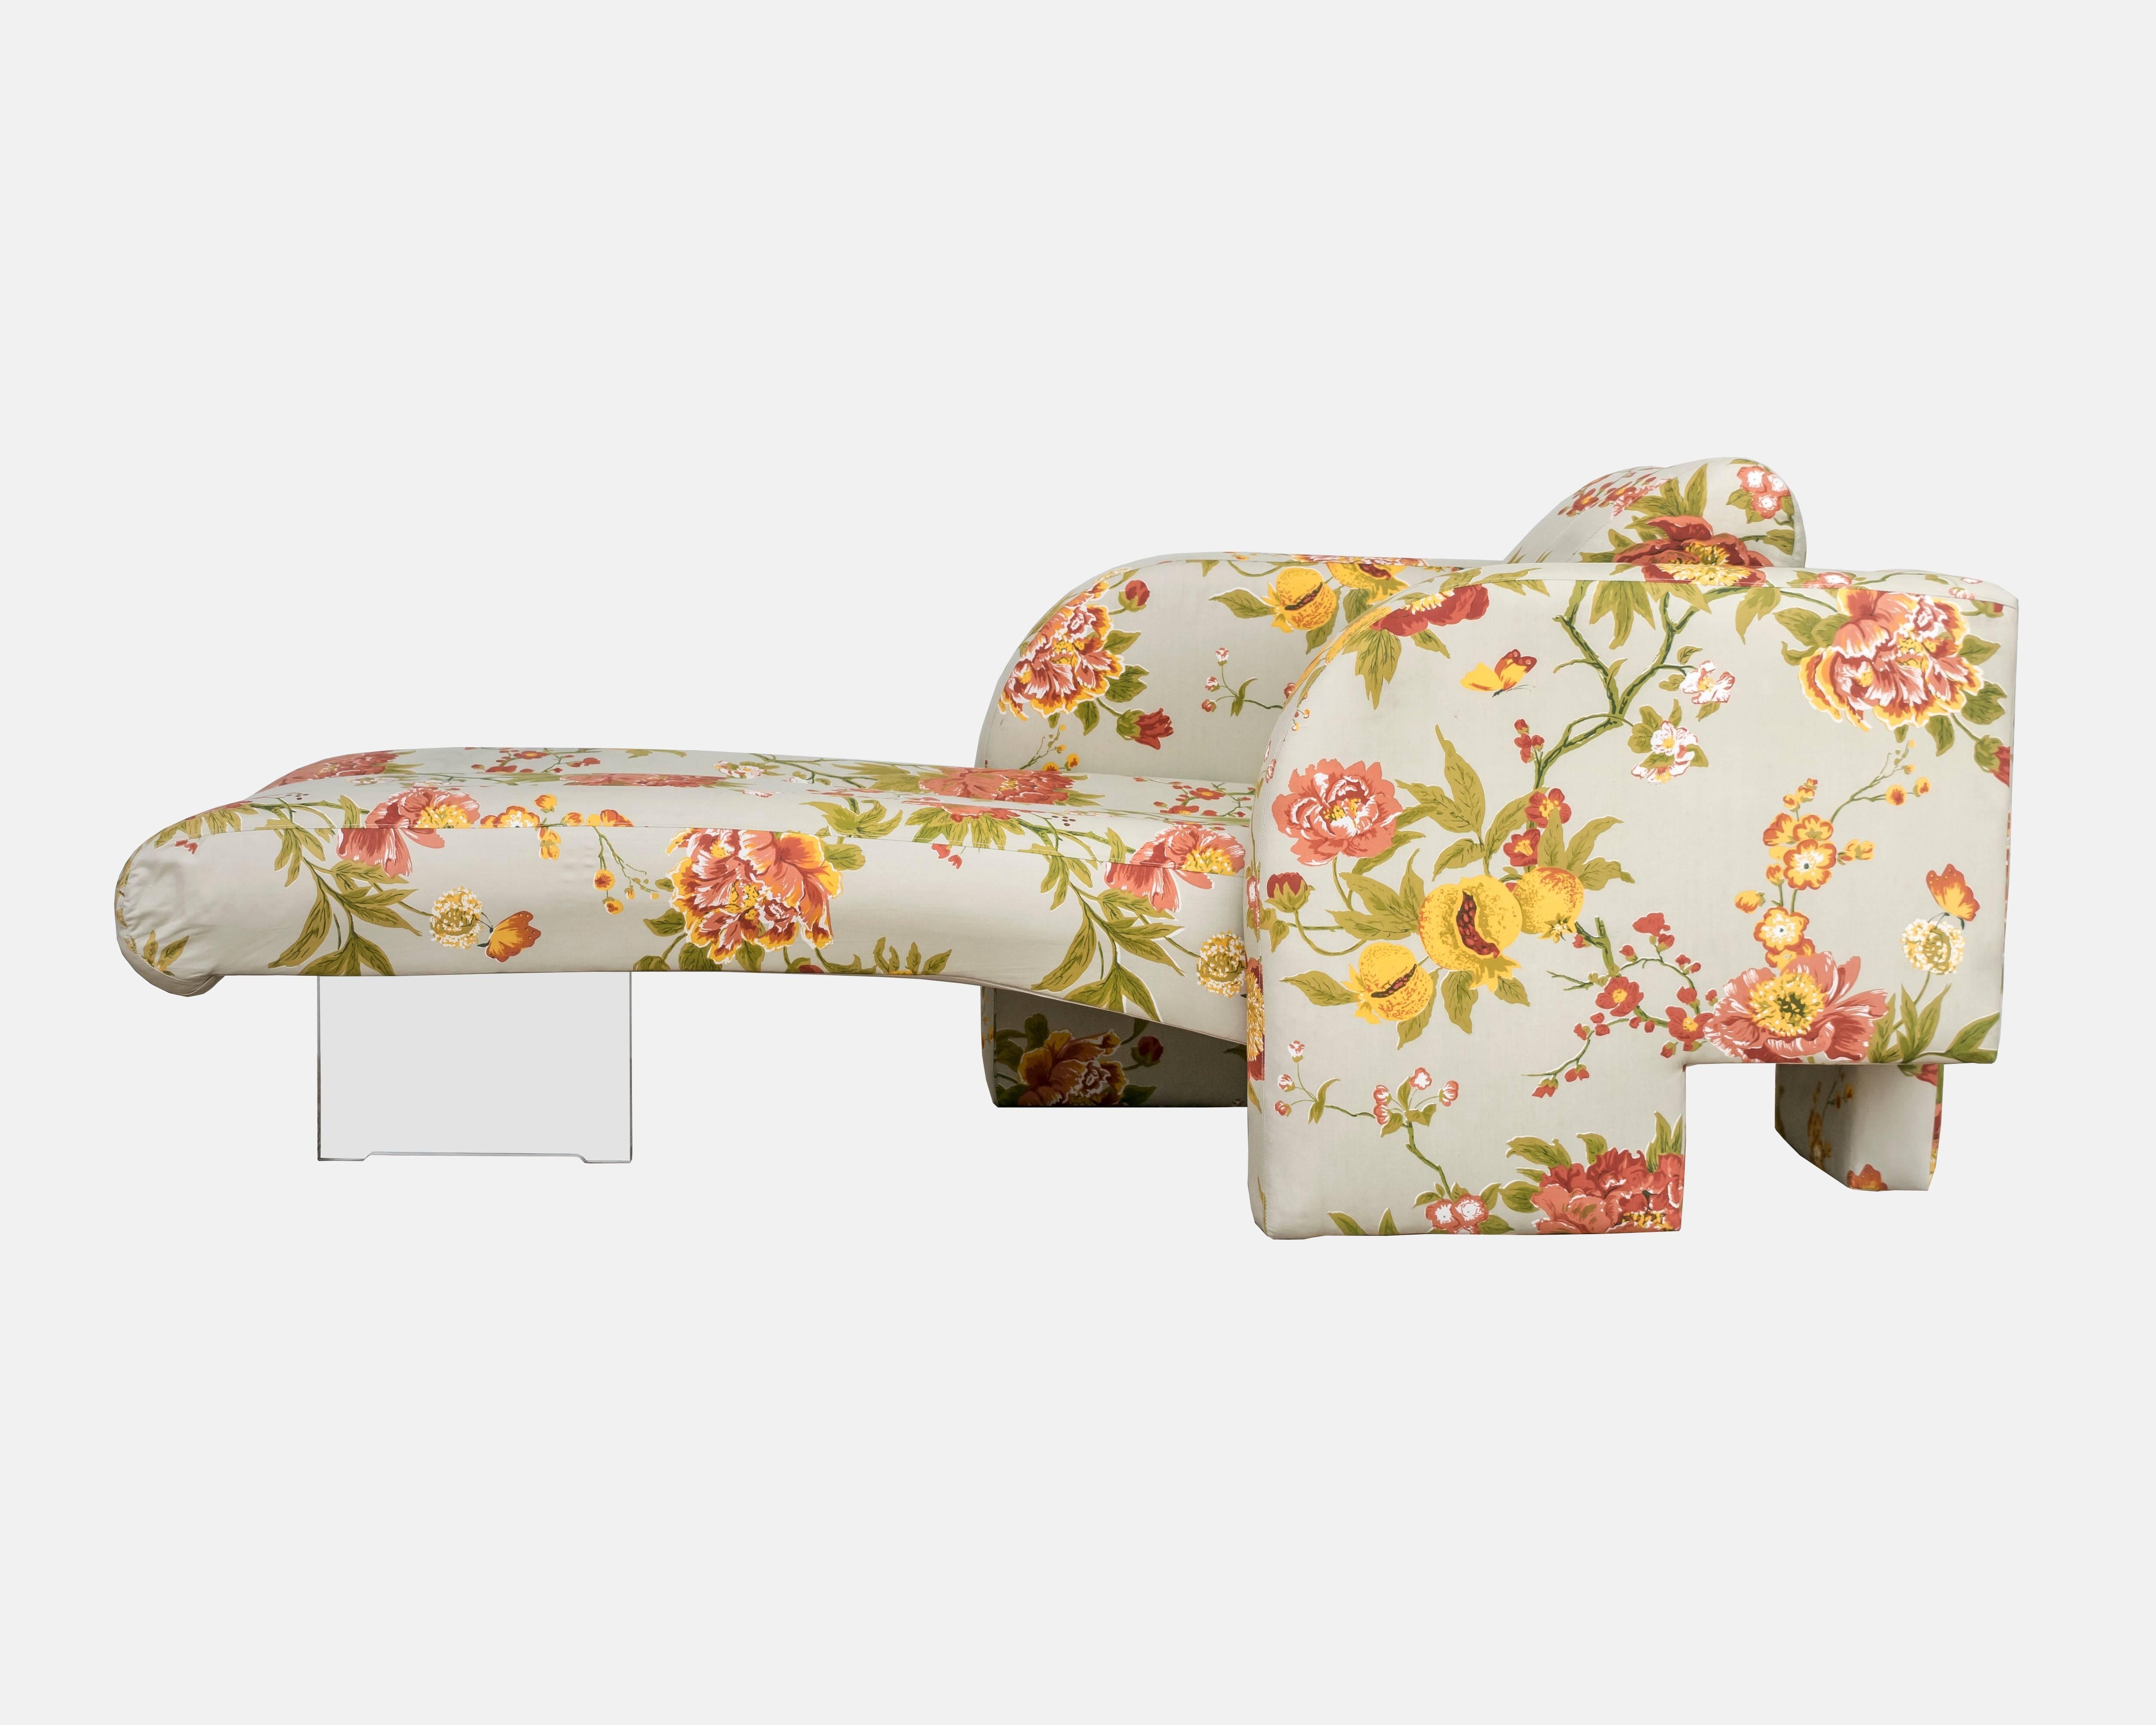 Every so often we come across one of these magnificent Vladimir Kagan omnibus style chaise lounges with channel tufting. This one has been reupholstered in the 1980s or 1990s in a floral fabric that is clean and in great shape. You could also